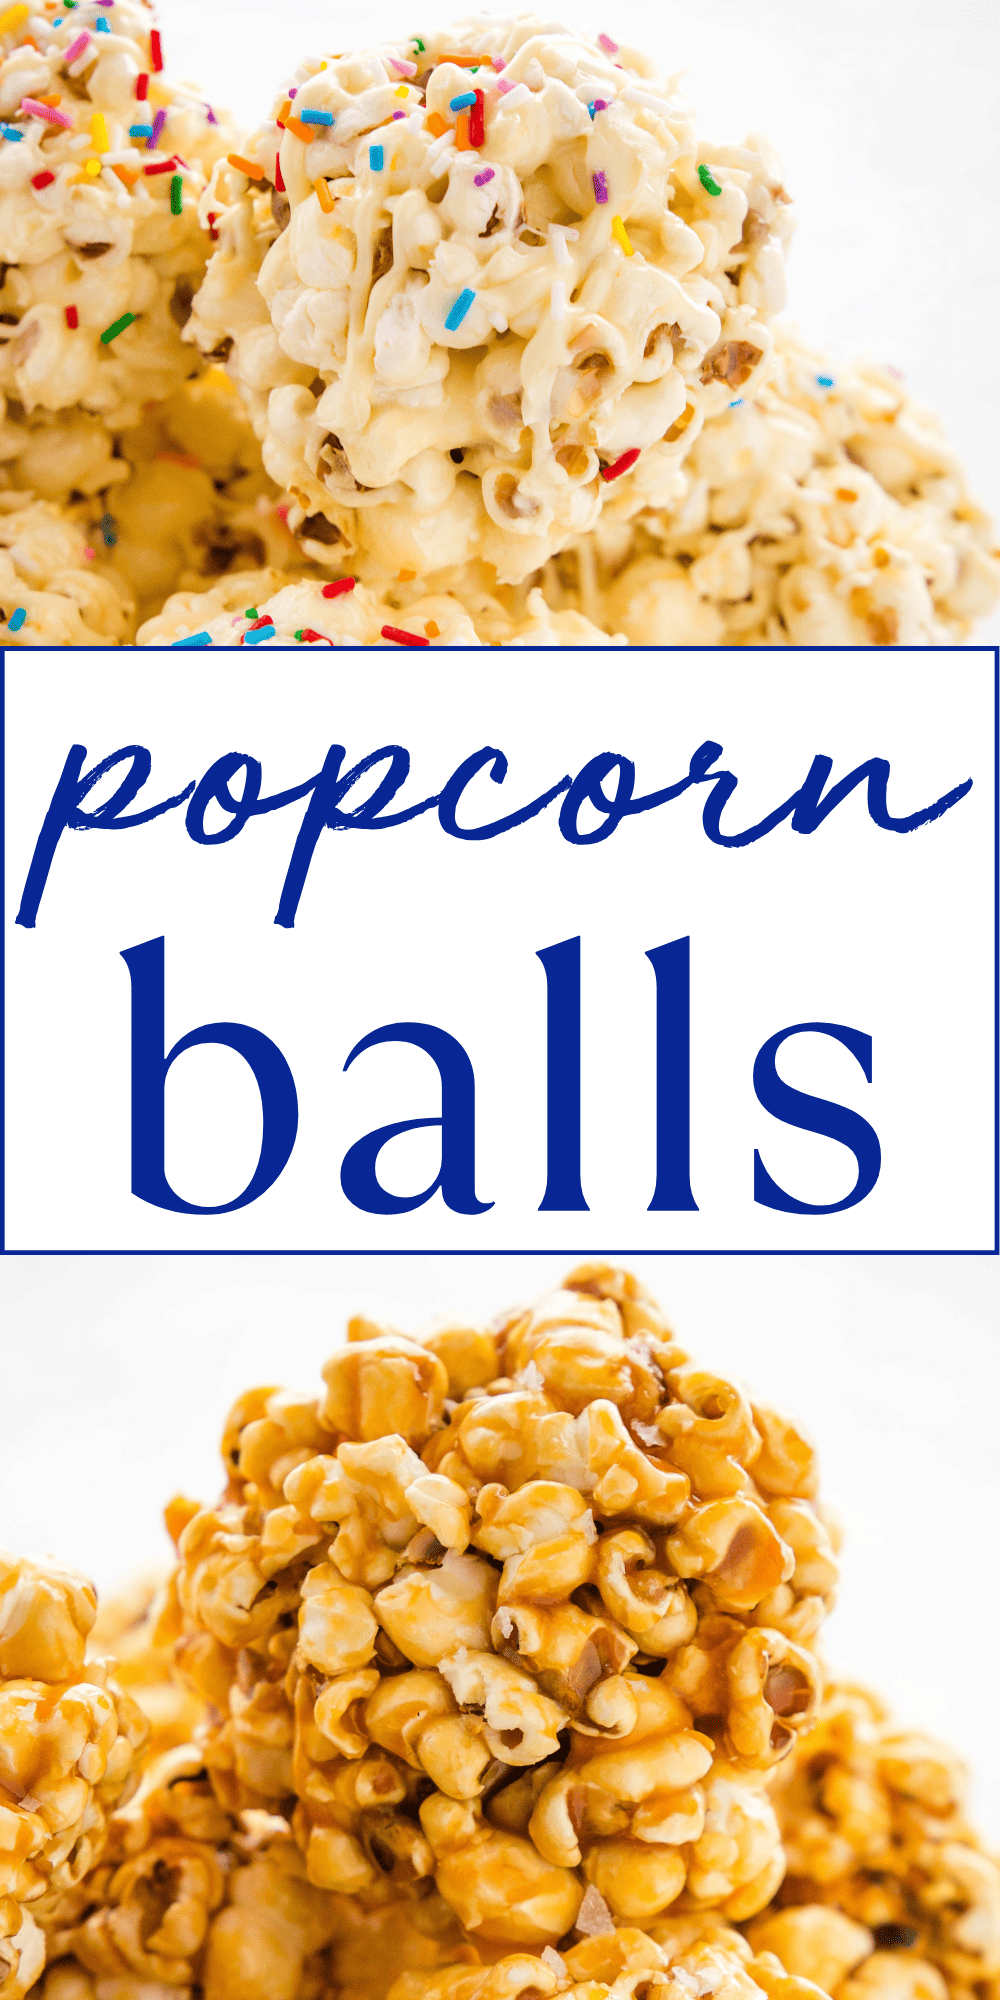 This Popcorn Balls recipe is the perfect classic holiday or halloween treat made three ways: marshmallow, caramel, and chocolate. A traditional popcorn ball recipe that's easy to make with our pro tips, tricks and troubleshooting ideas. Recipe from thebusybaker.ca! #popcorn #popcornballs #easyrecipe #snack #popcorntreat #treatrecipe #holidaytreat #christmastreat #popcornrecipe via @busybakerblog